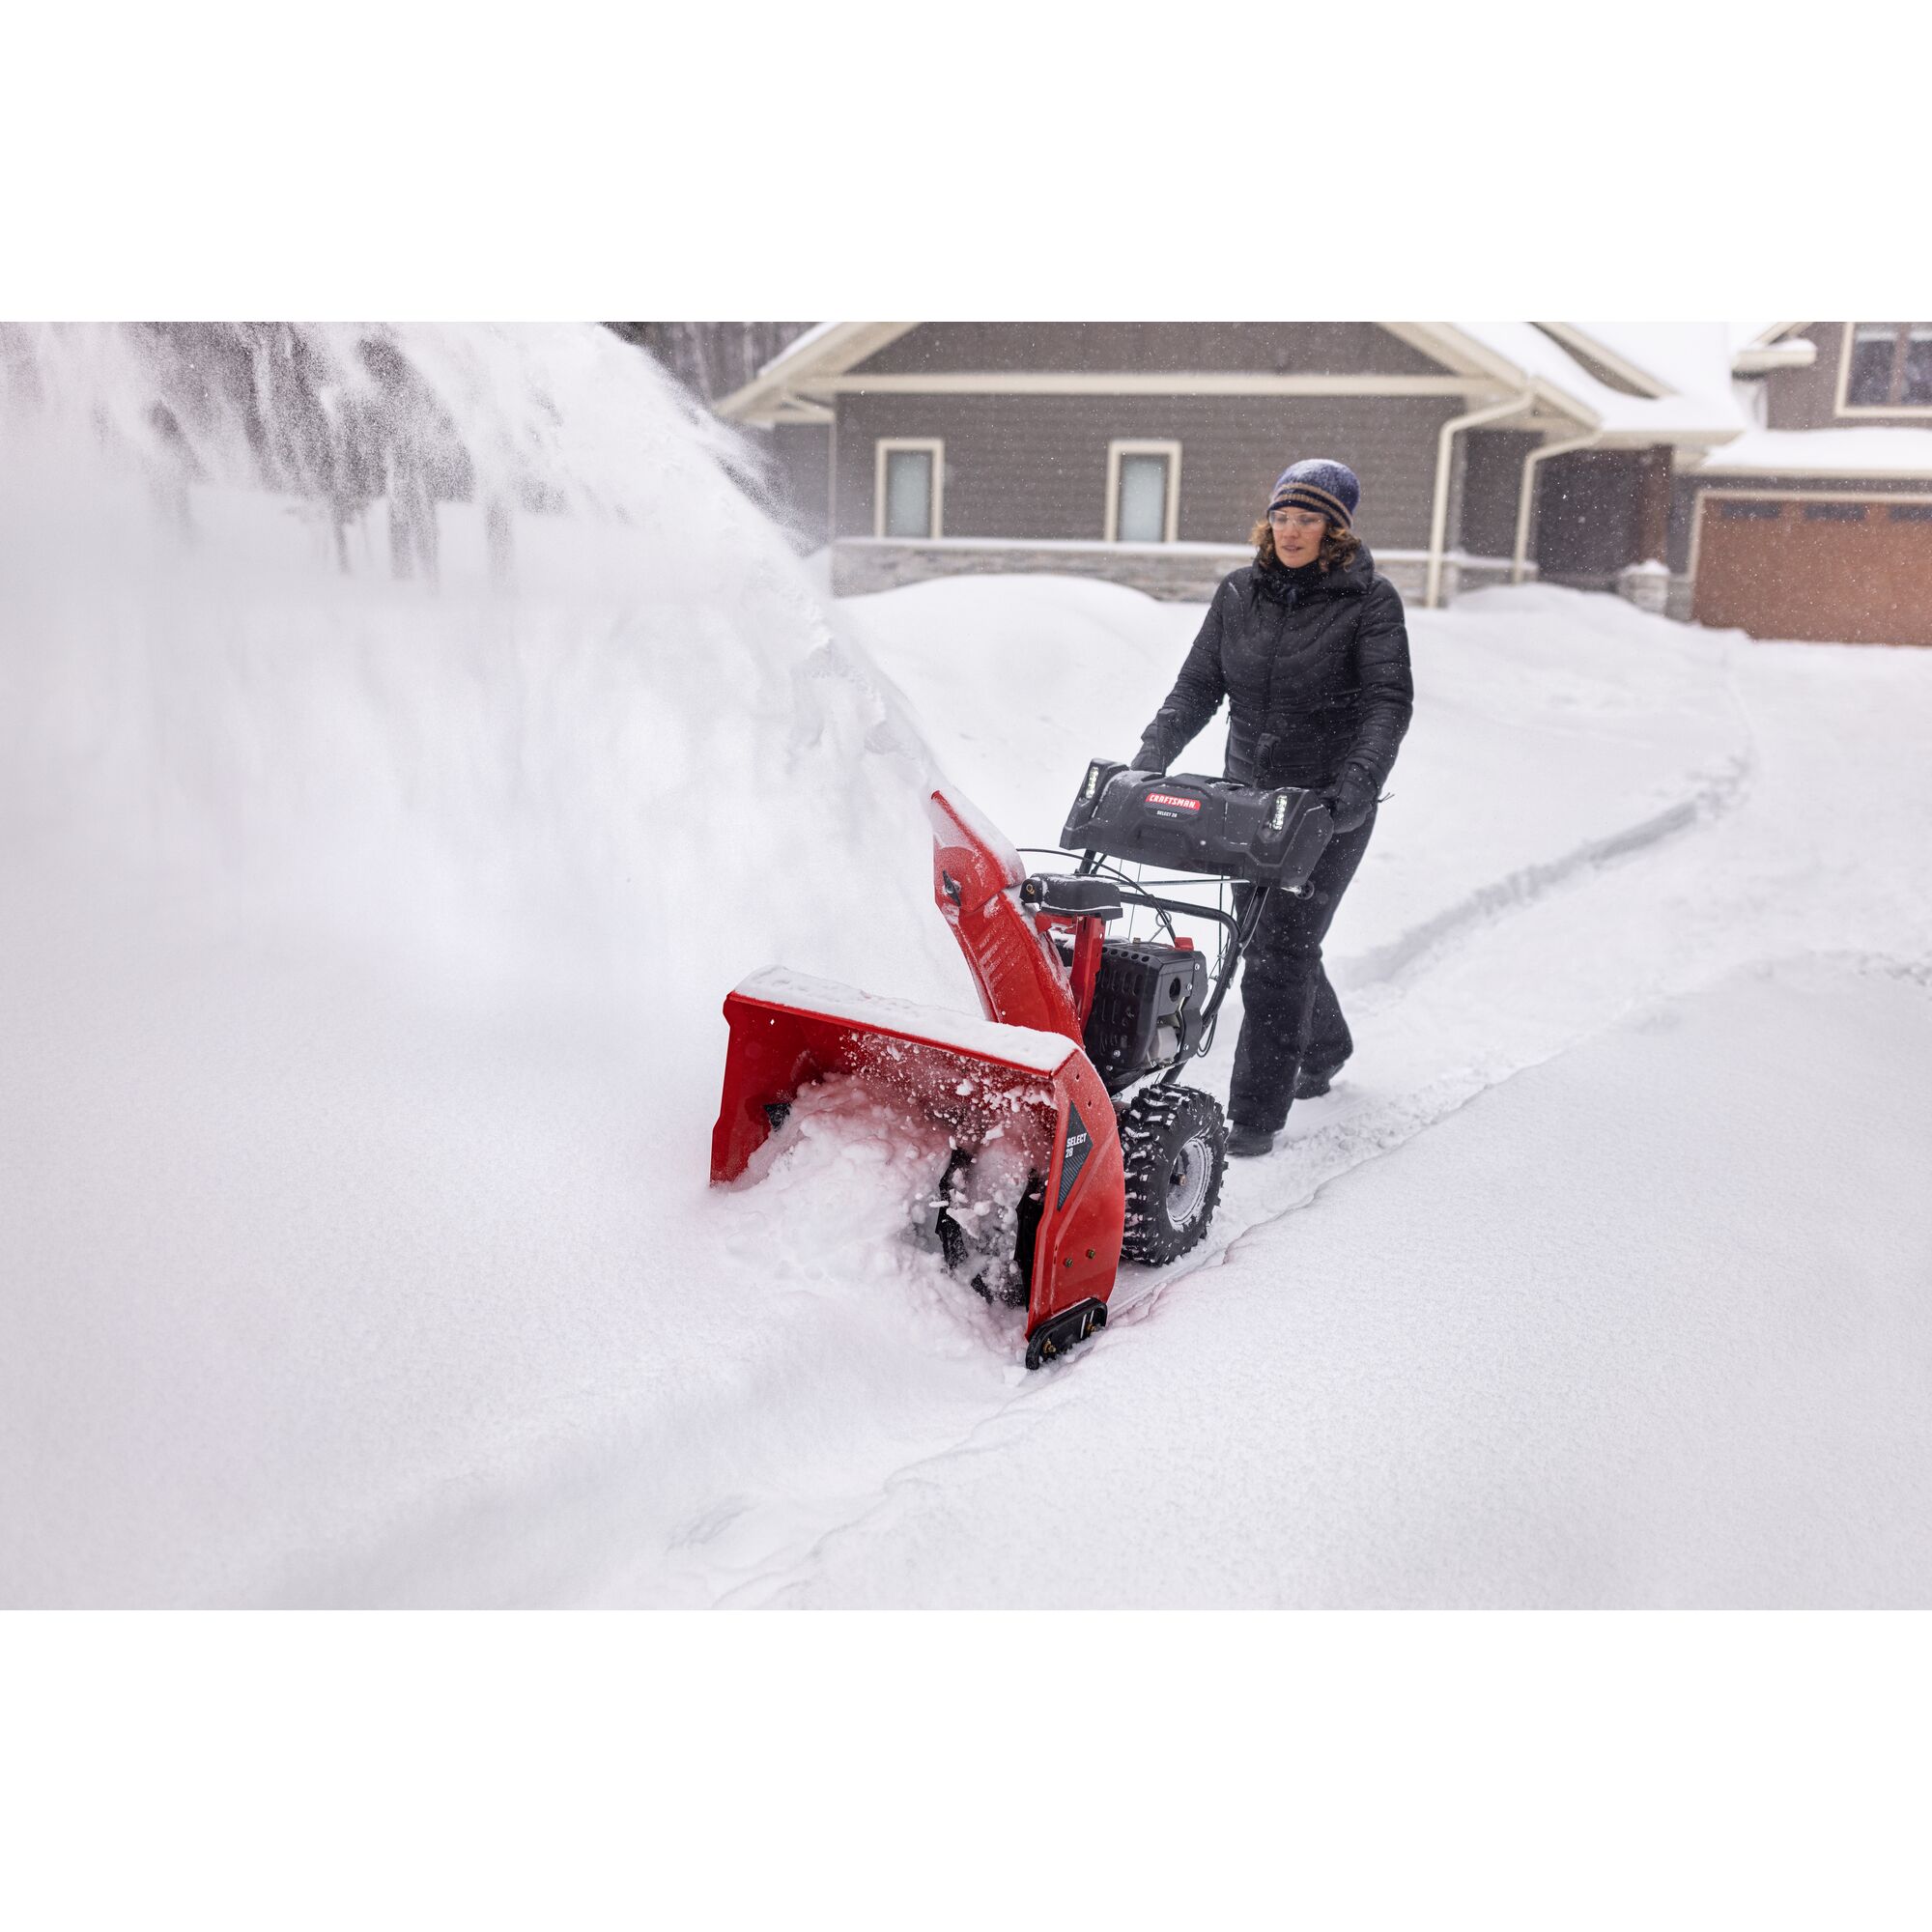 CRAFTSMAN Select 28 Snowblower clearing snow off driveway near house